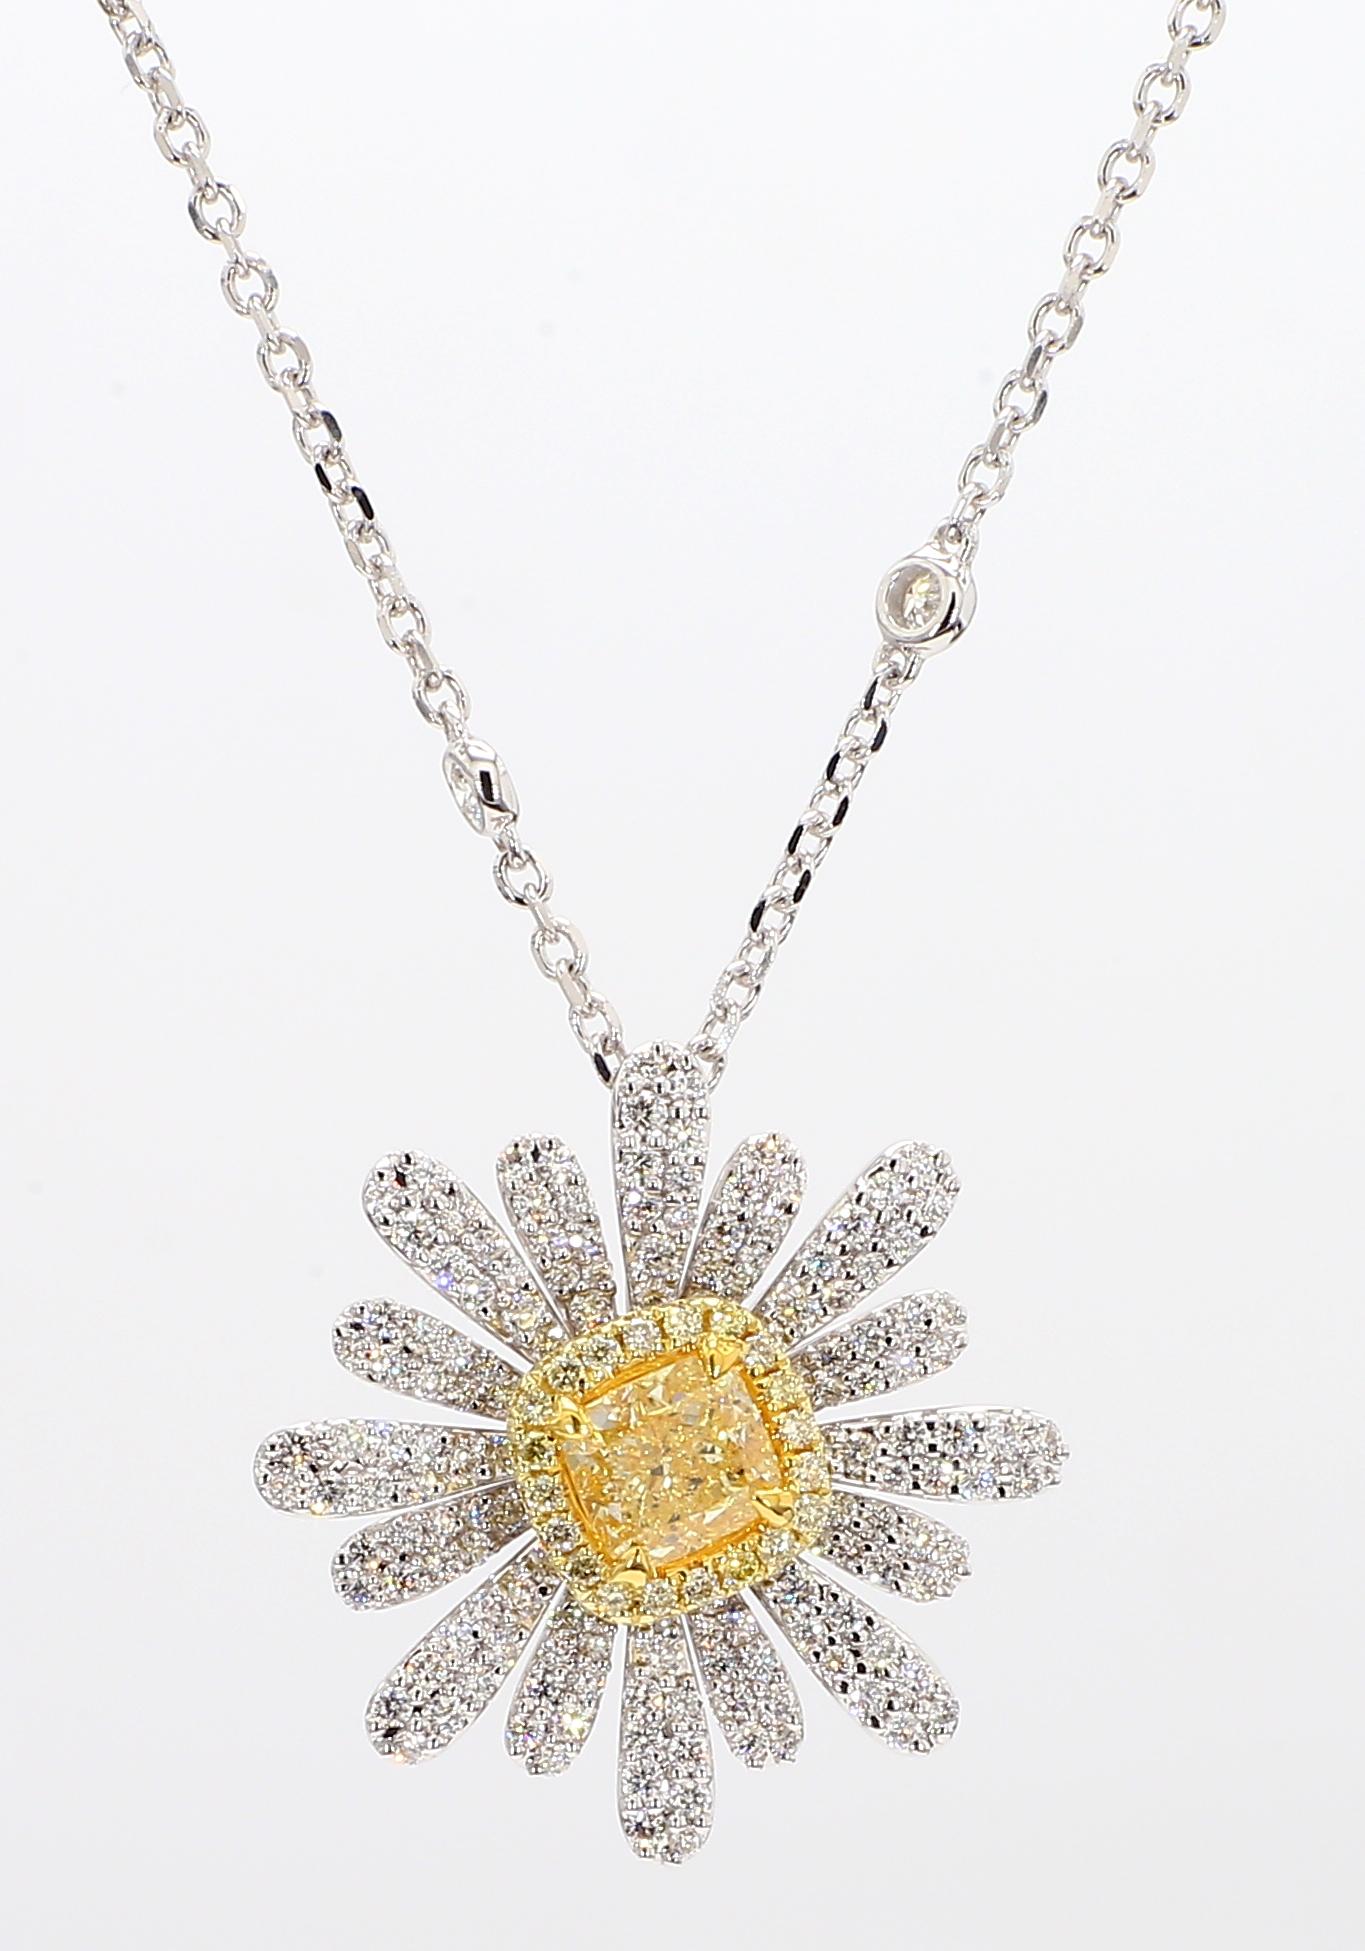 RareGemWorld's intriguing GIA certified diamond pendant. Mounted in a beautiful 18K Yellow and White Gold setting with a natural cushion cut yellow diamond. The yellow diamond is surrounded by round natural yellow diamond melee and round natural